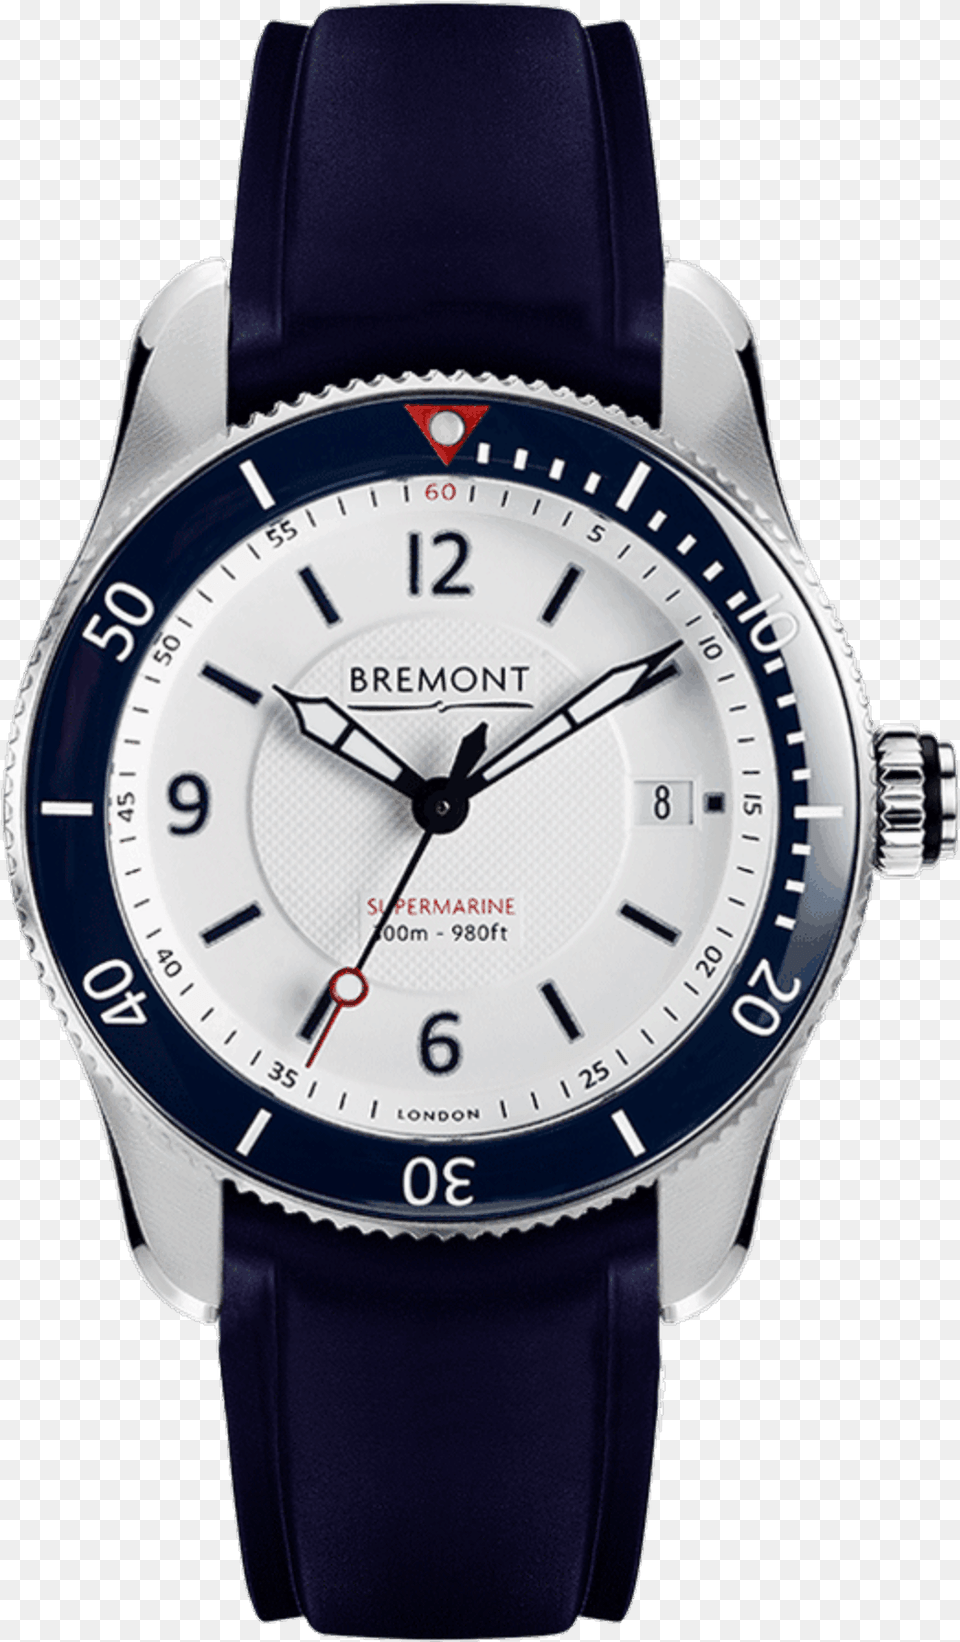 Bremont S300 White, Arm, Body Part, Person, Wristwatch Png